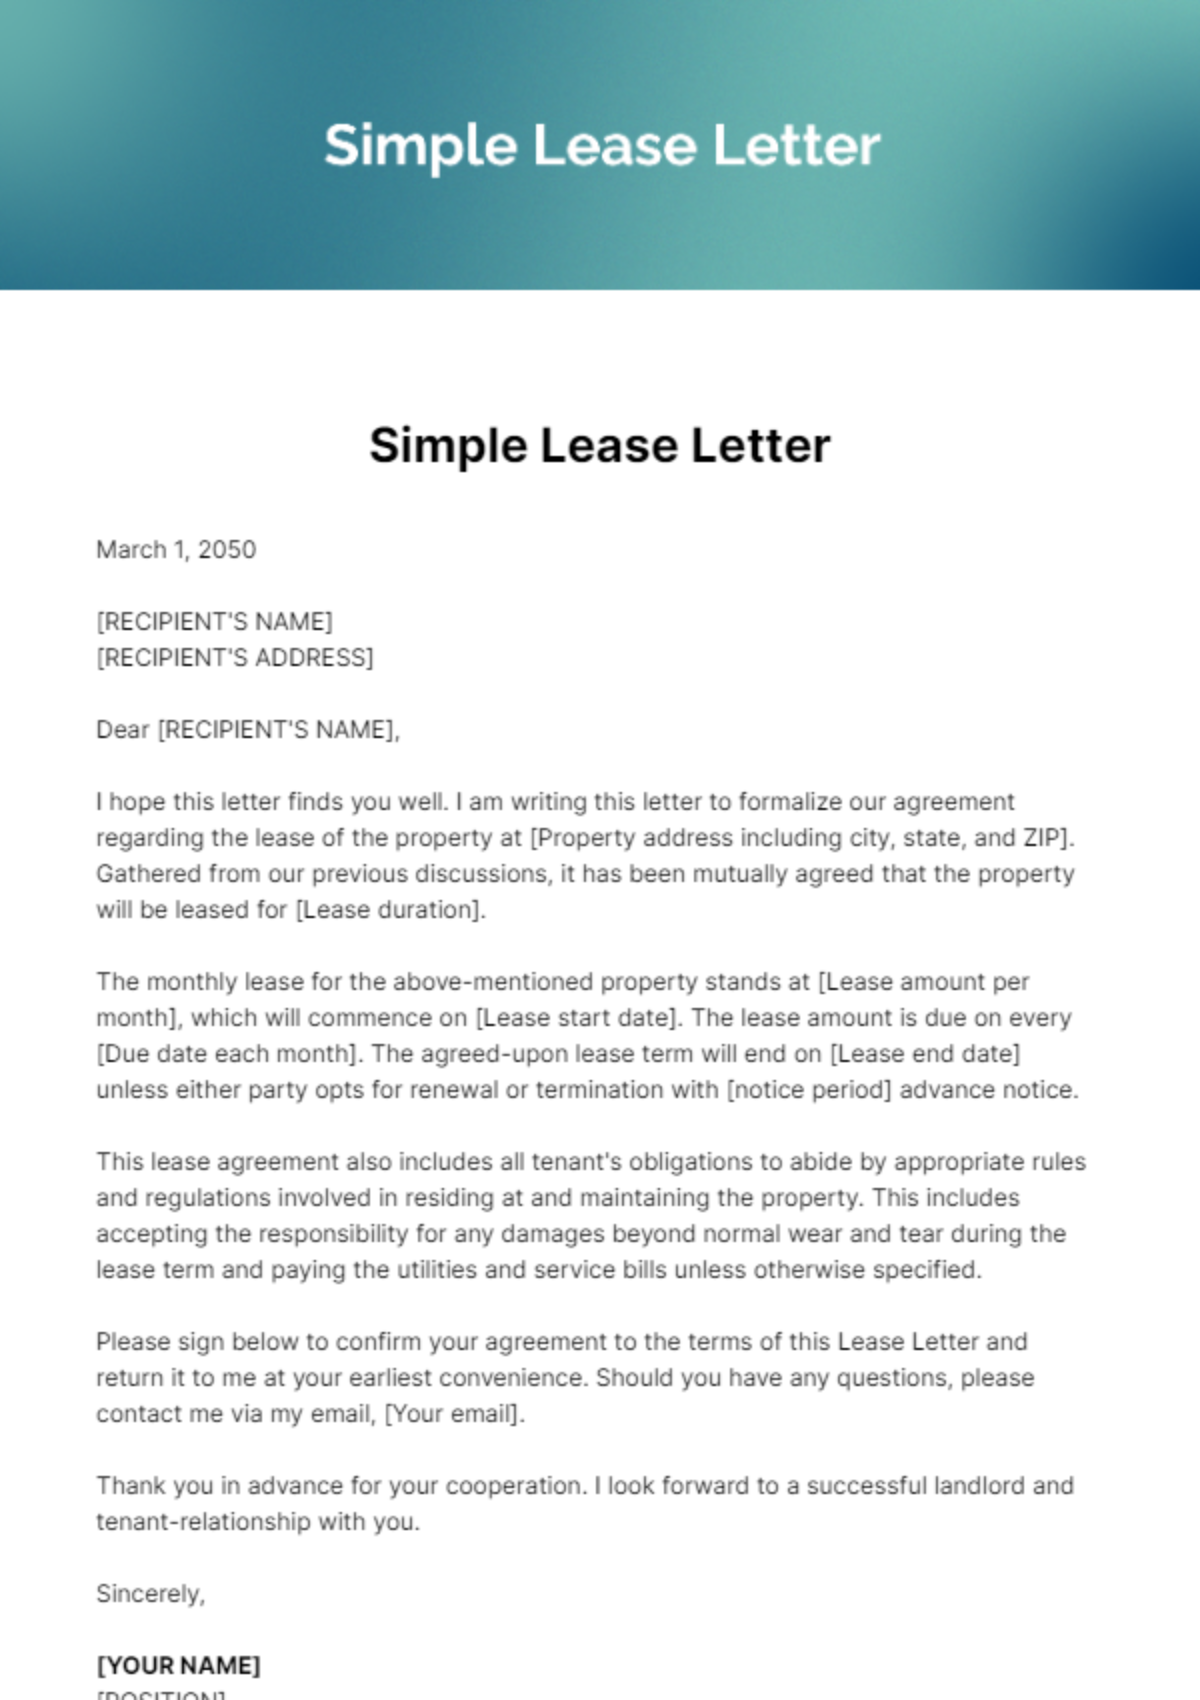 Free Simple Lease Letter Template